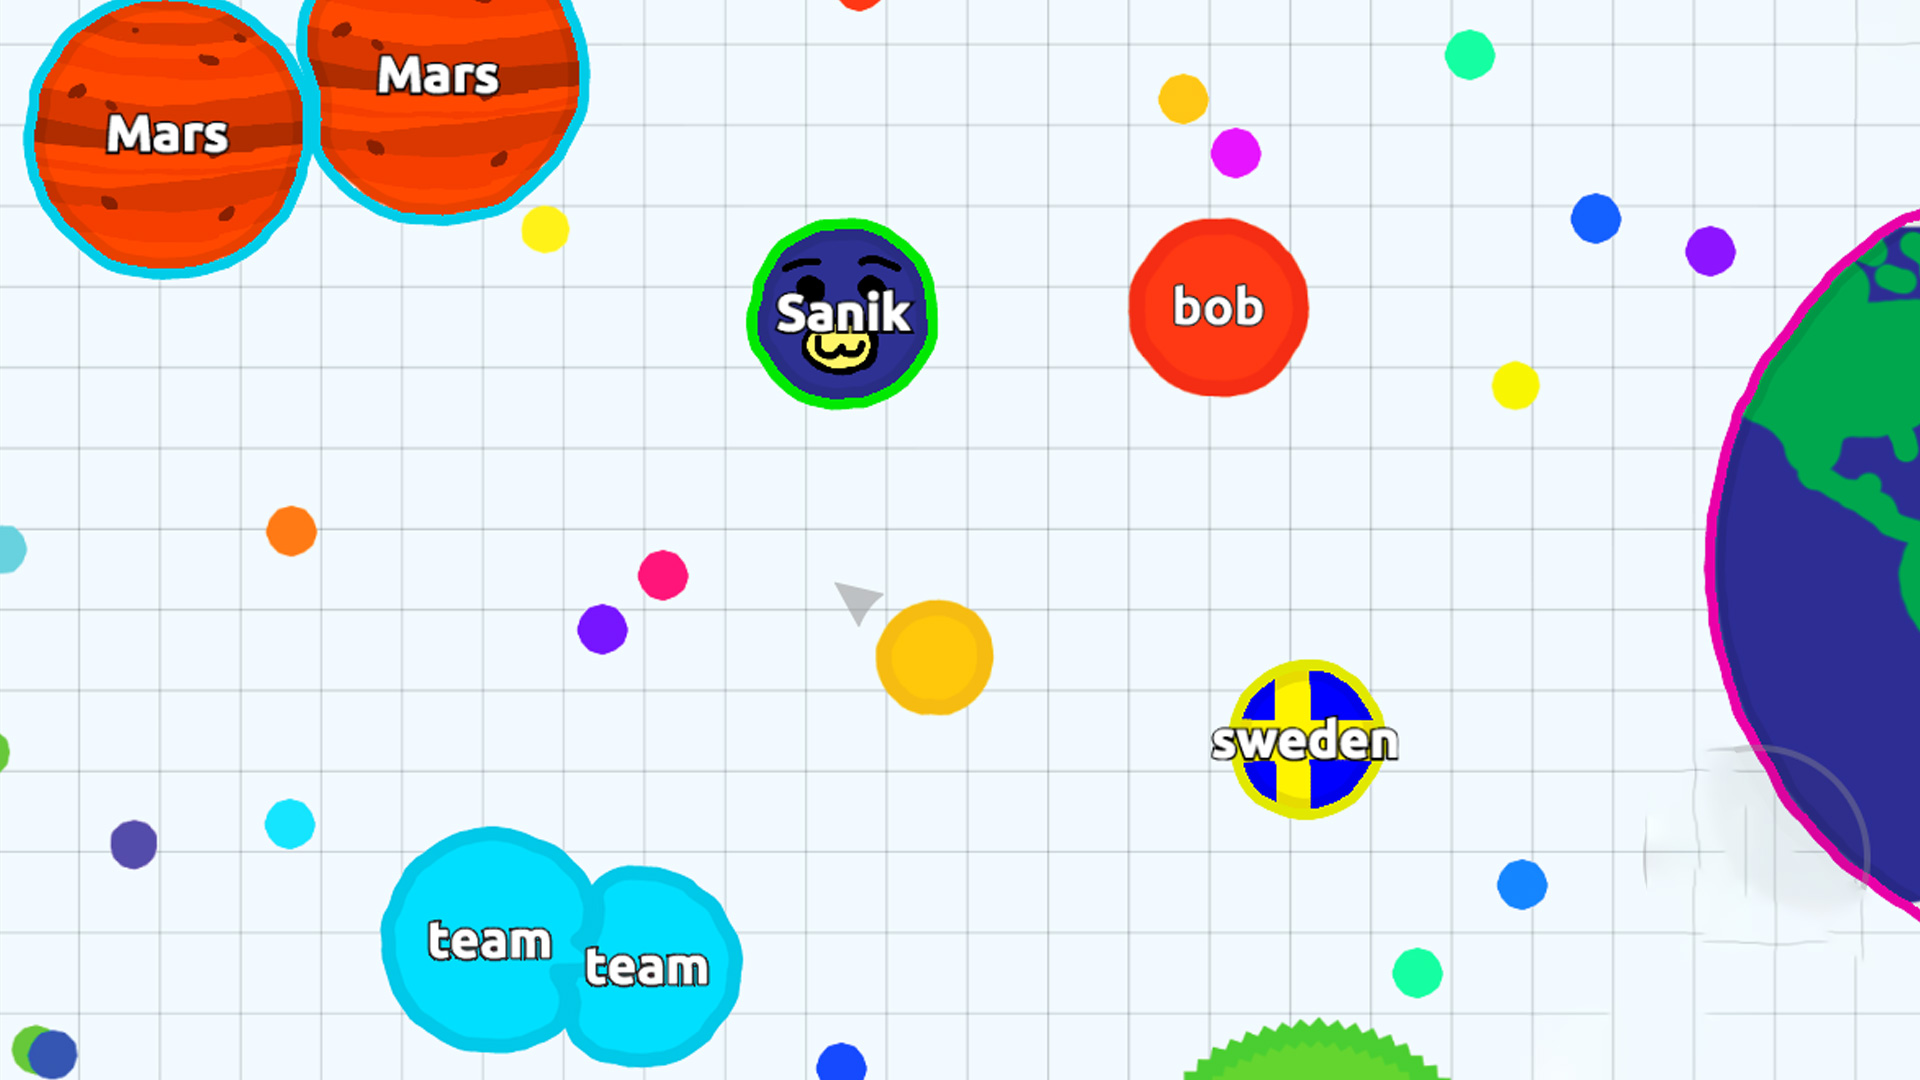 A typical game of Agar.io, several players congregating in the same area 